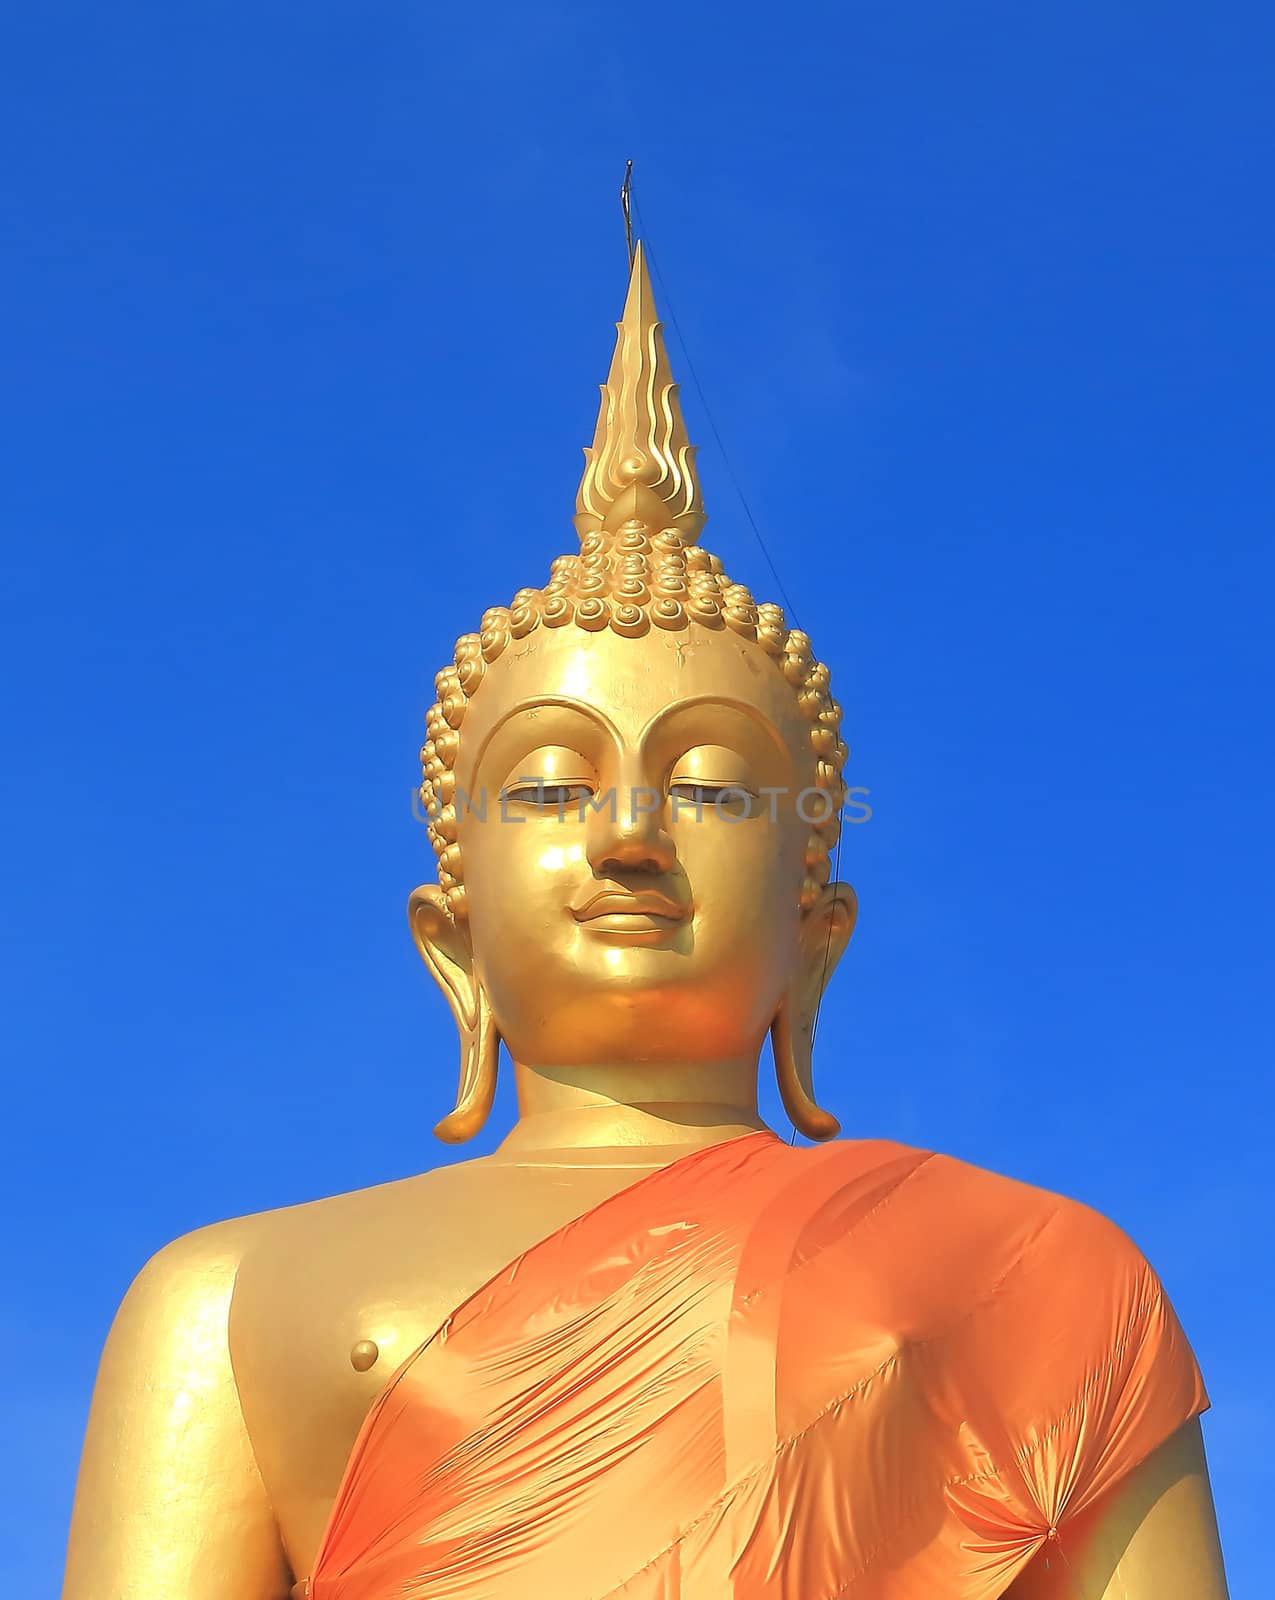 A golden buddha statue with a blue sky, Pathumthani, Thailand